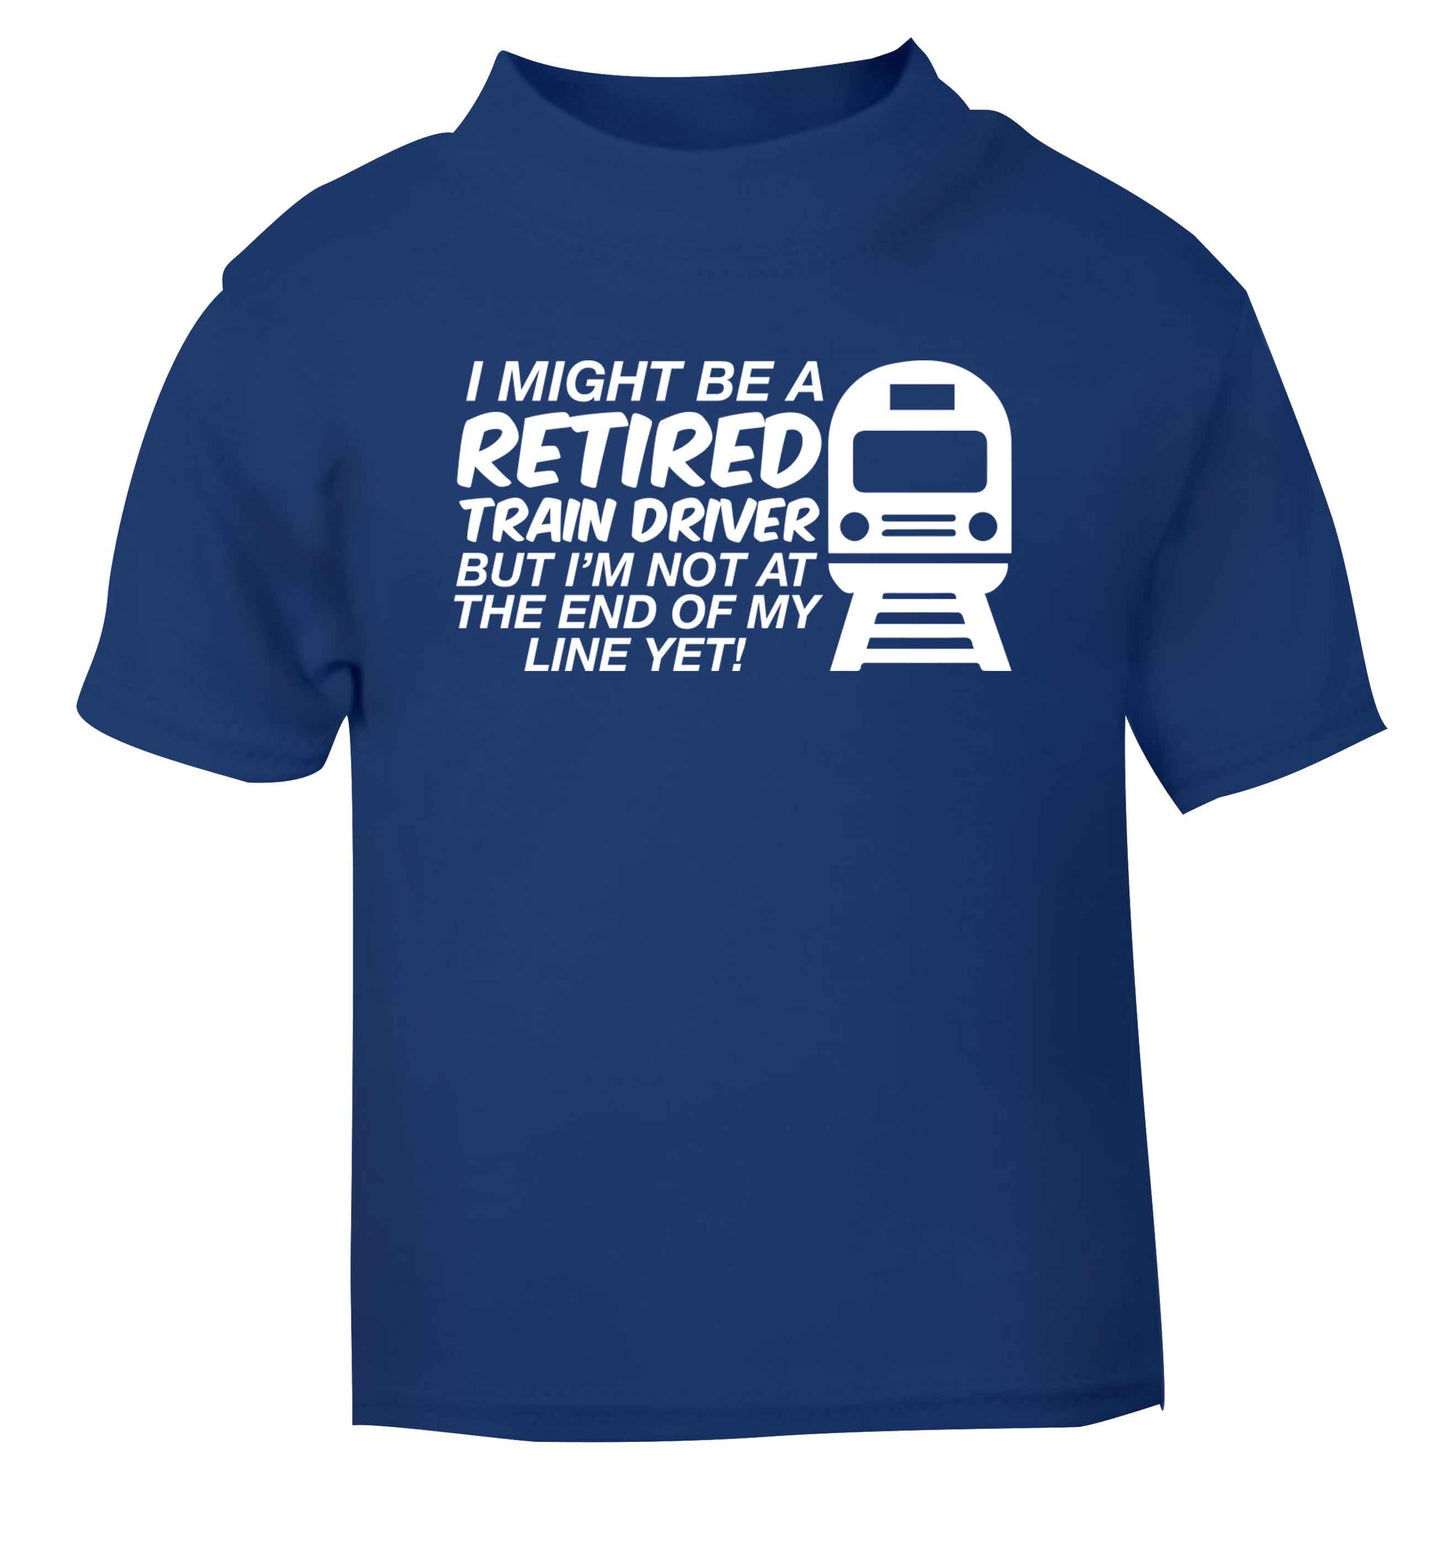 Retired train driver but I'm not at the end of my line yet blue Baby Toddler Tshirt 2 Years